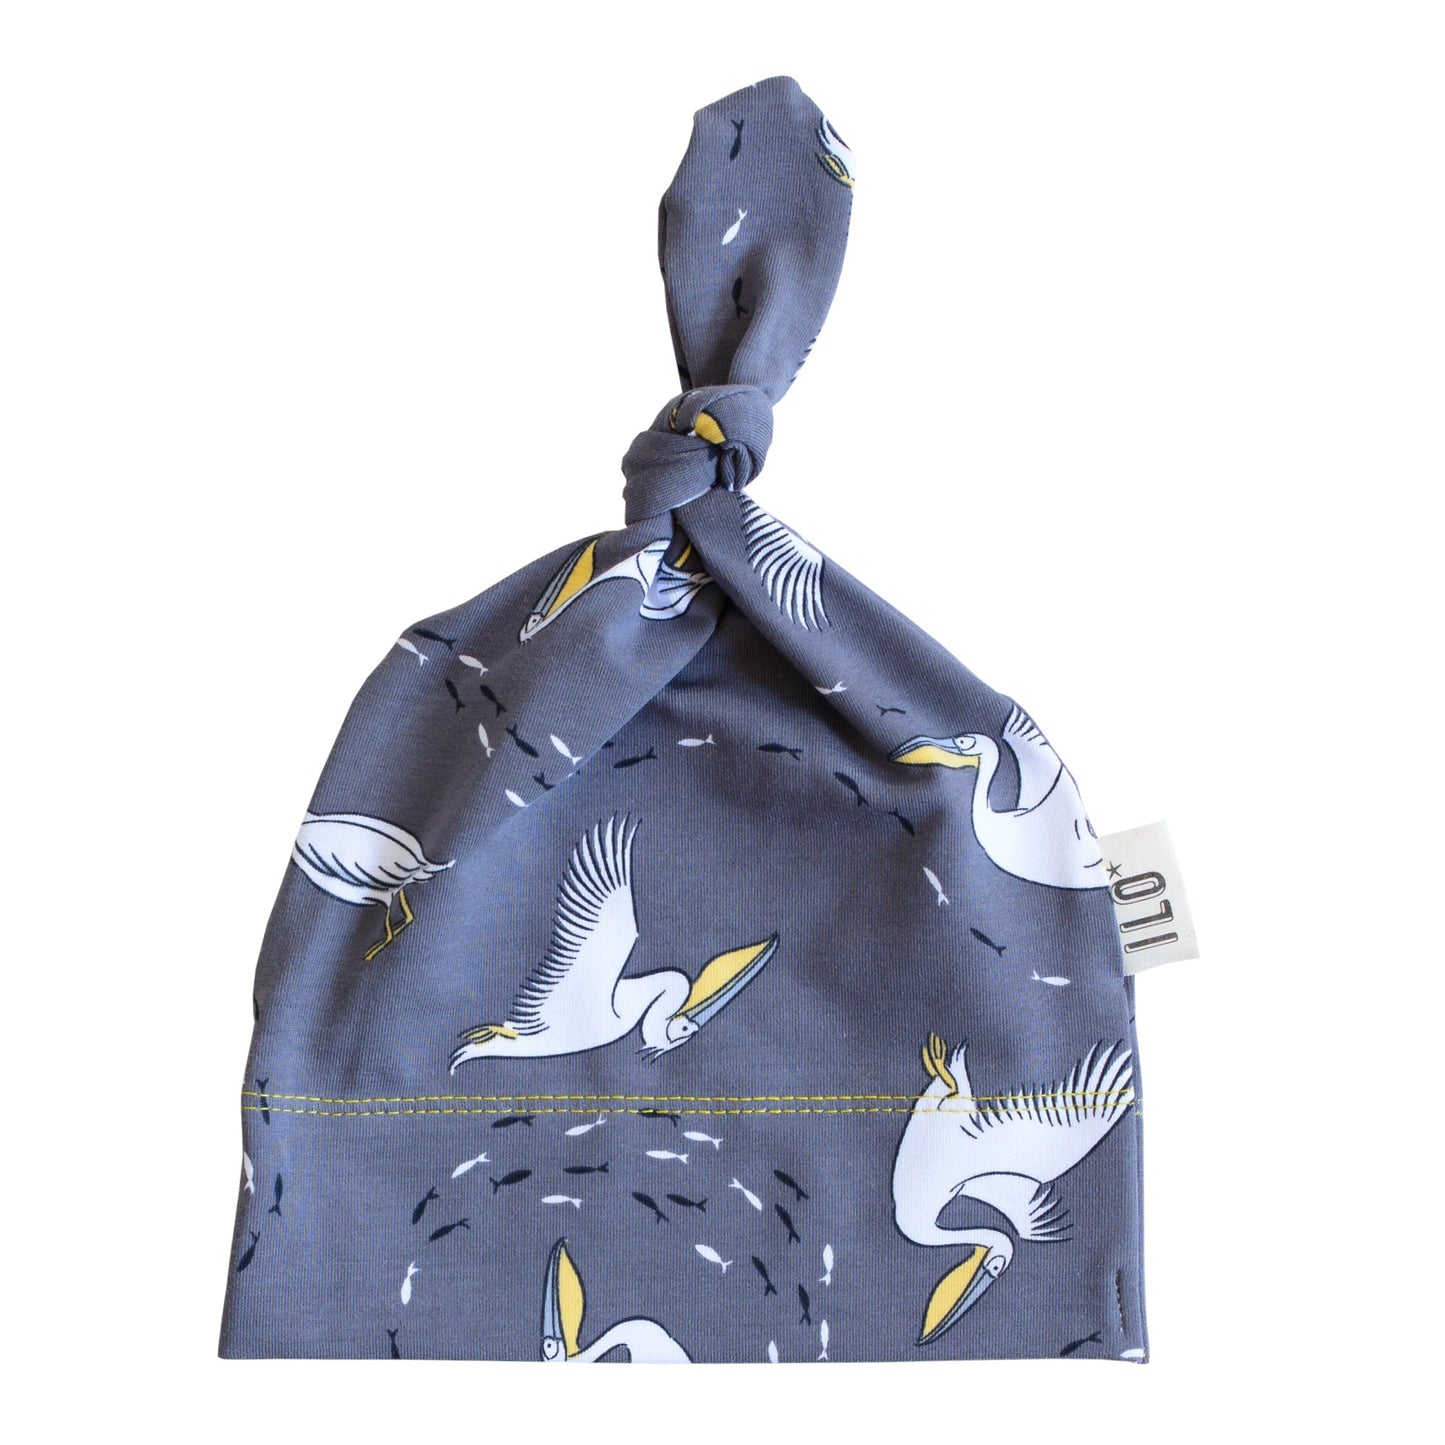 Pelicans organic knot hat, grey illustration with yellow and white contrasts